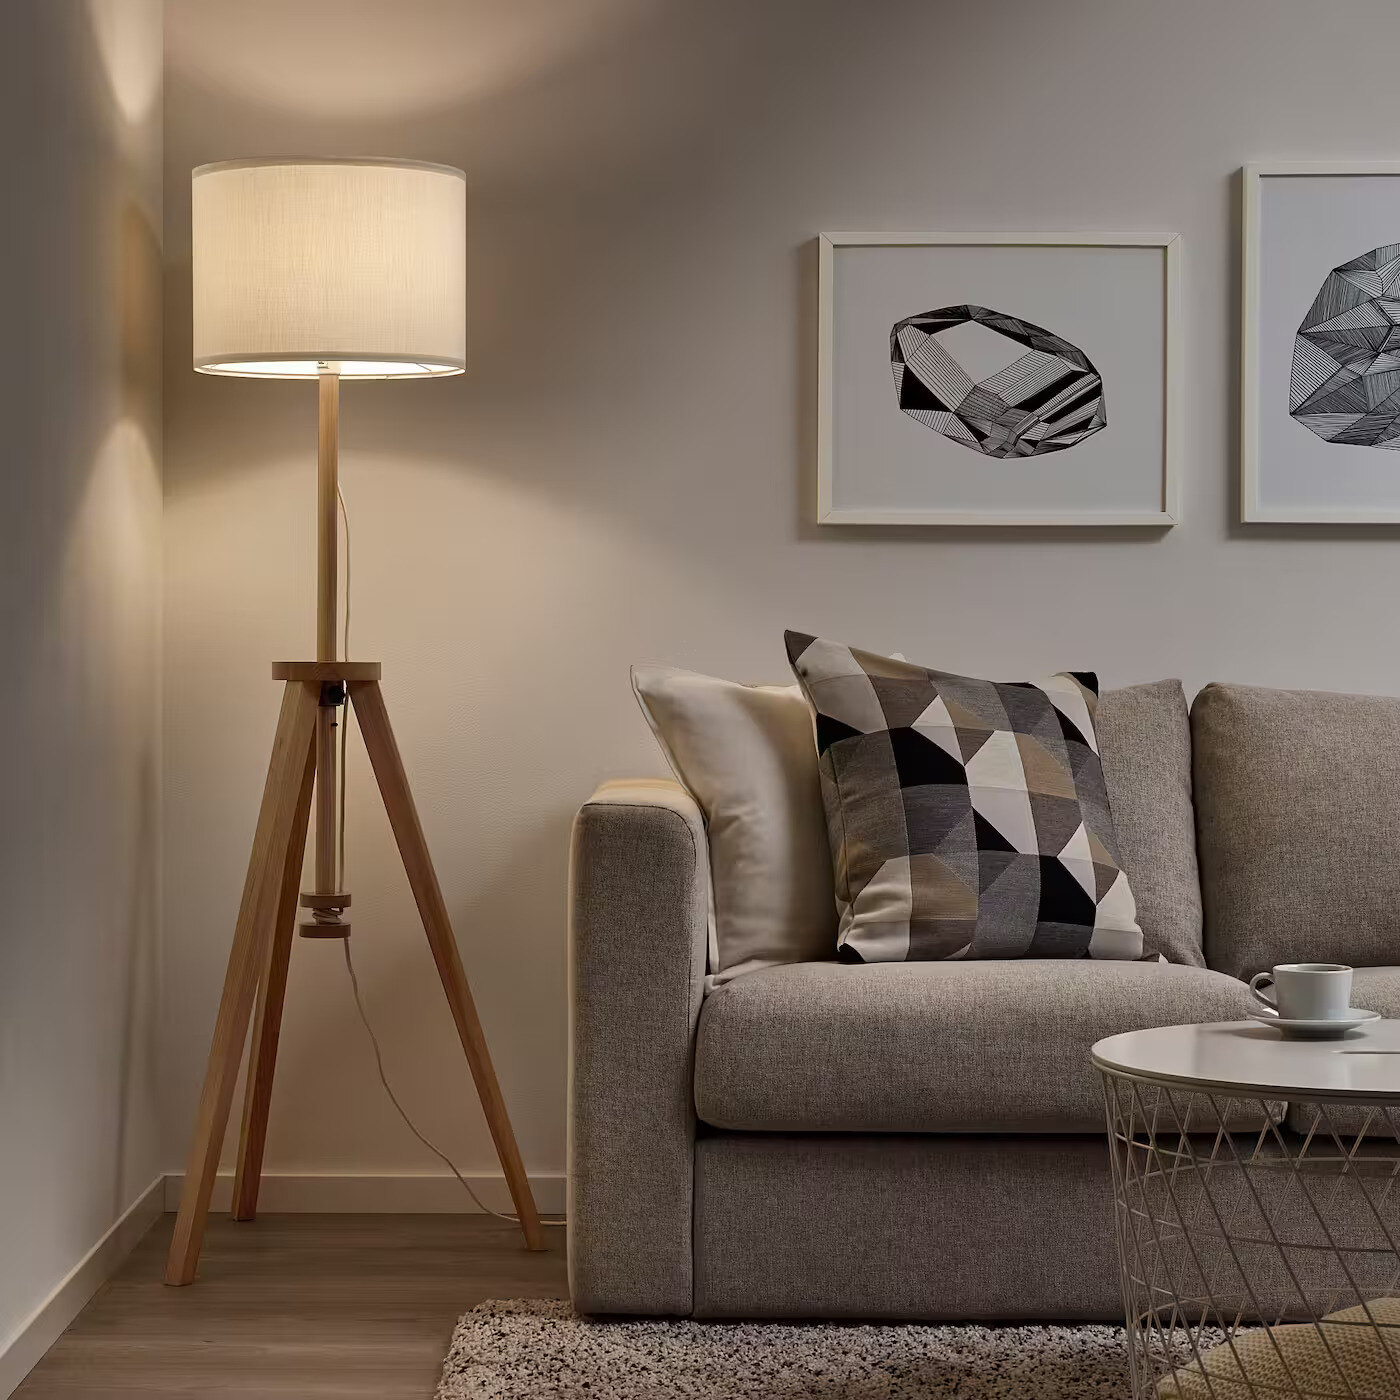 Stylish Floor Lamp: A Must-Have for Her Space